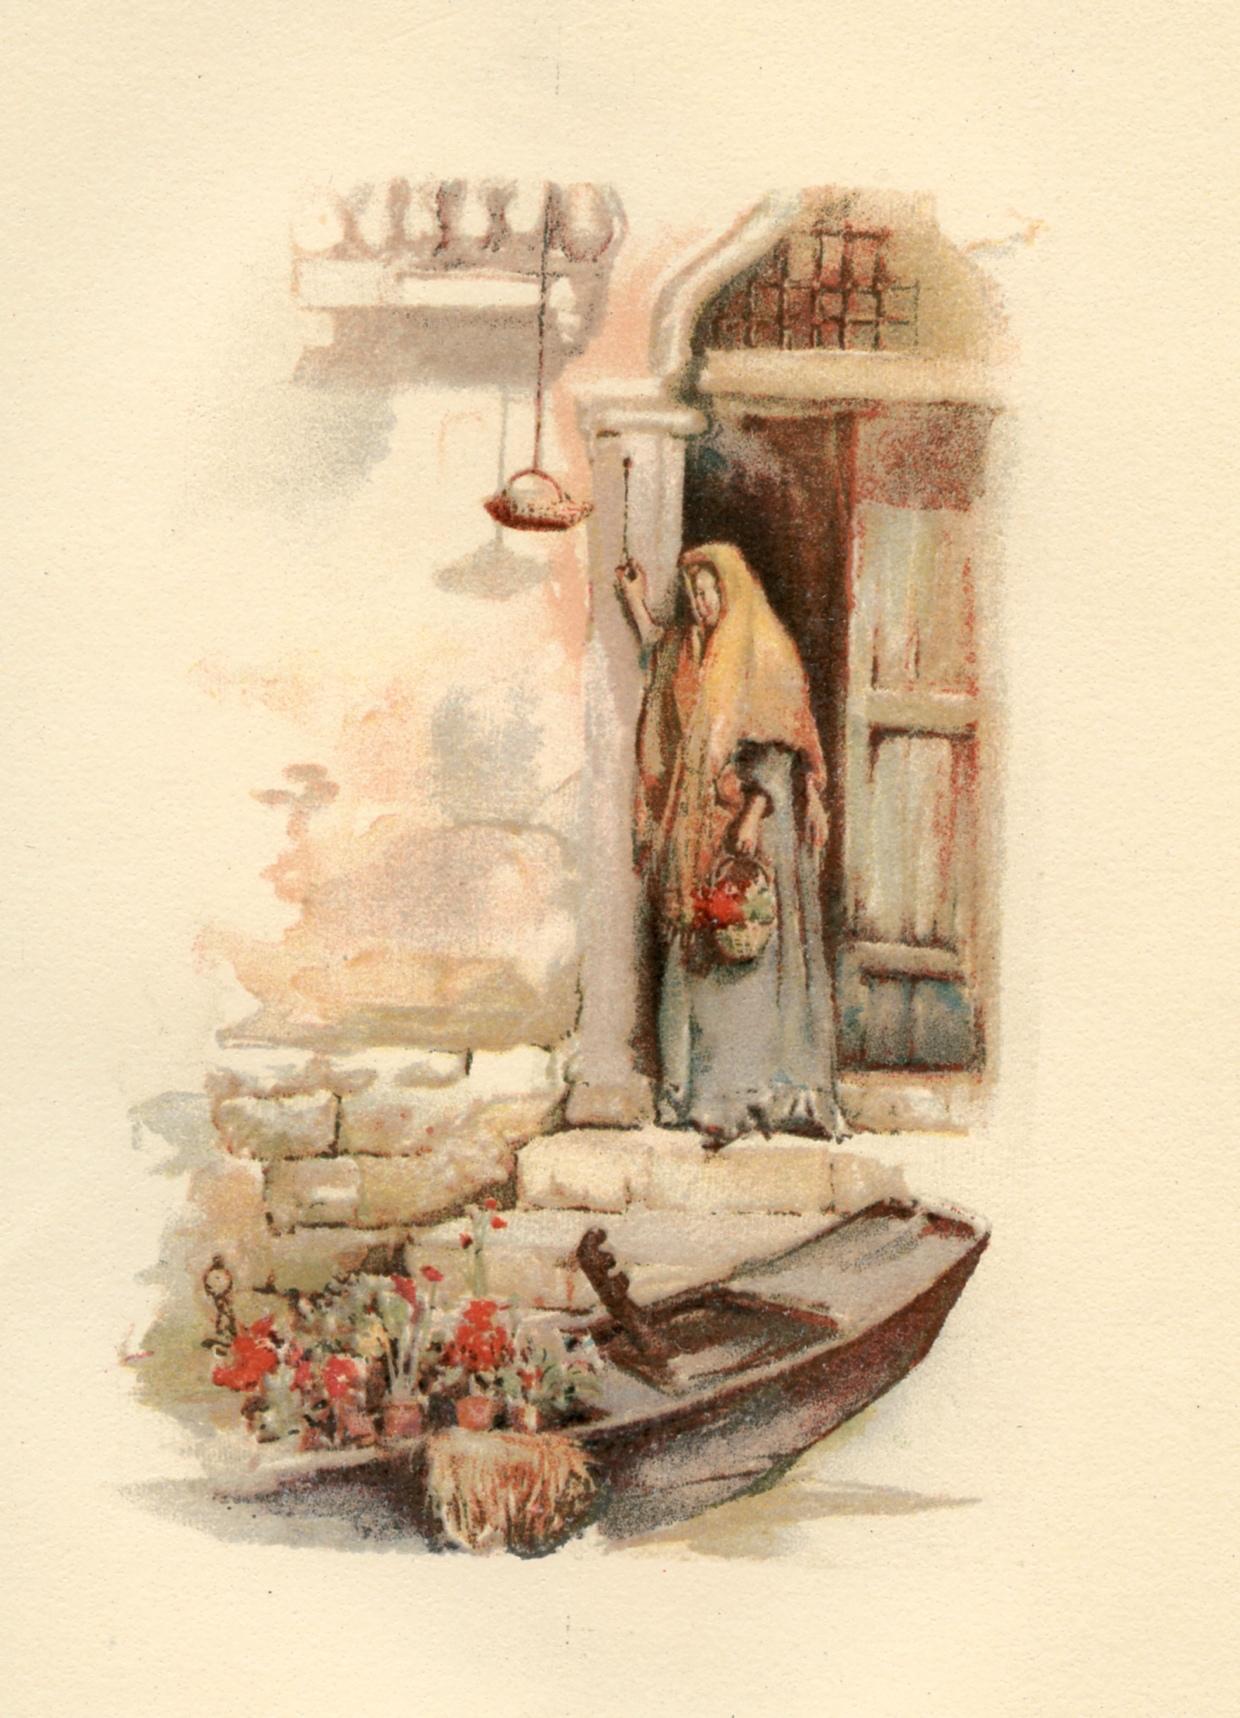 Medium: chromolithograph (after the watercolor). This delightful antique lithograph was published in a small edition in 1892 to illustrate a rare volume with scenes of Venetian life. A beautiful impression printed on cream wove paper. Image size: 4